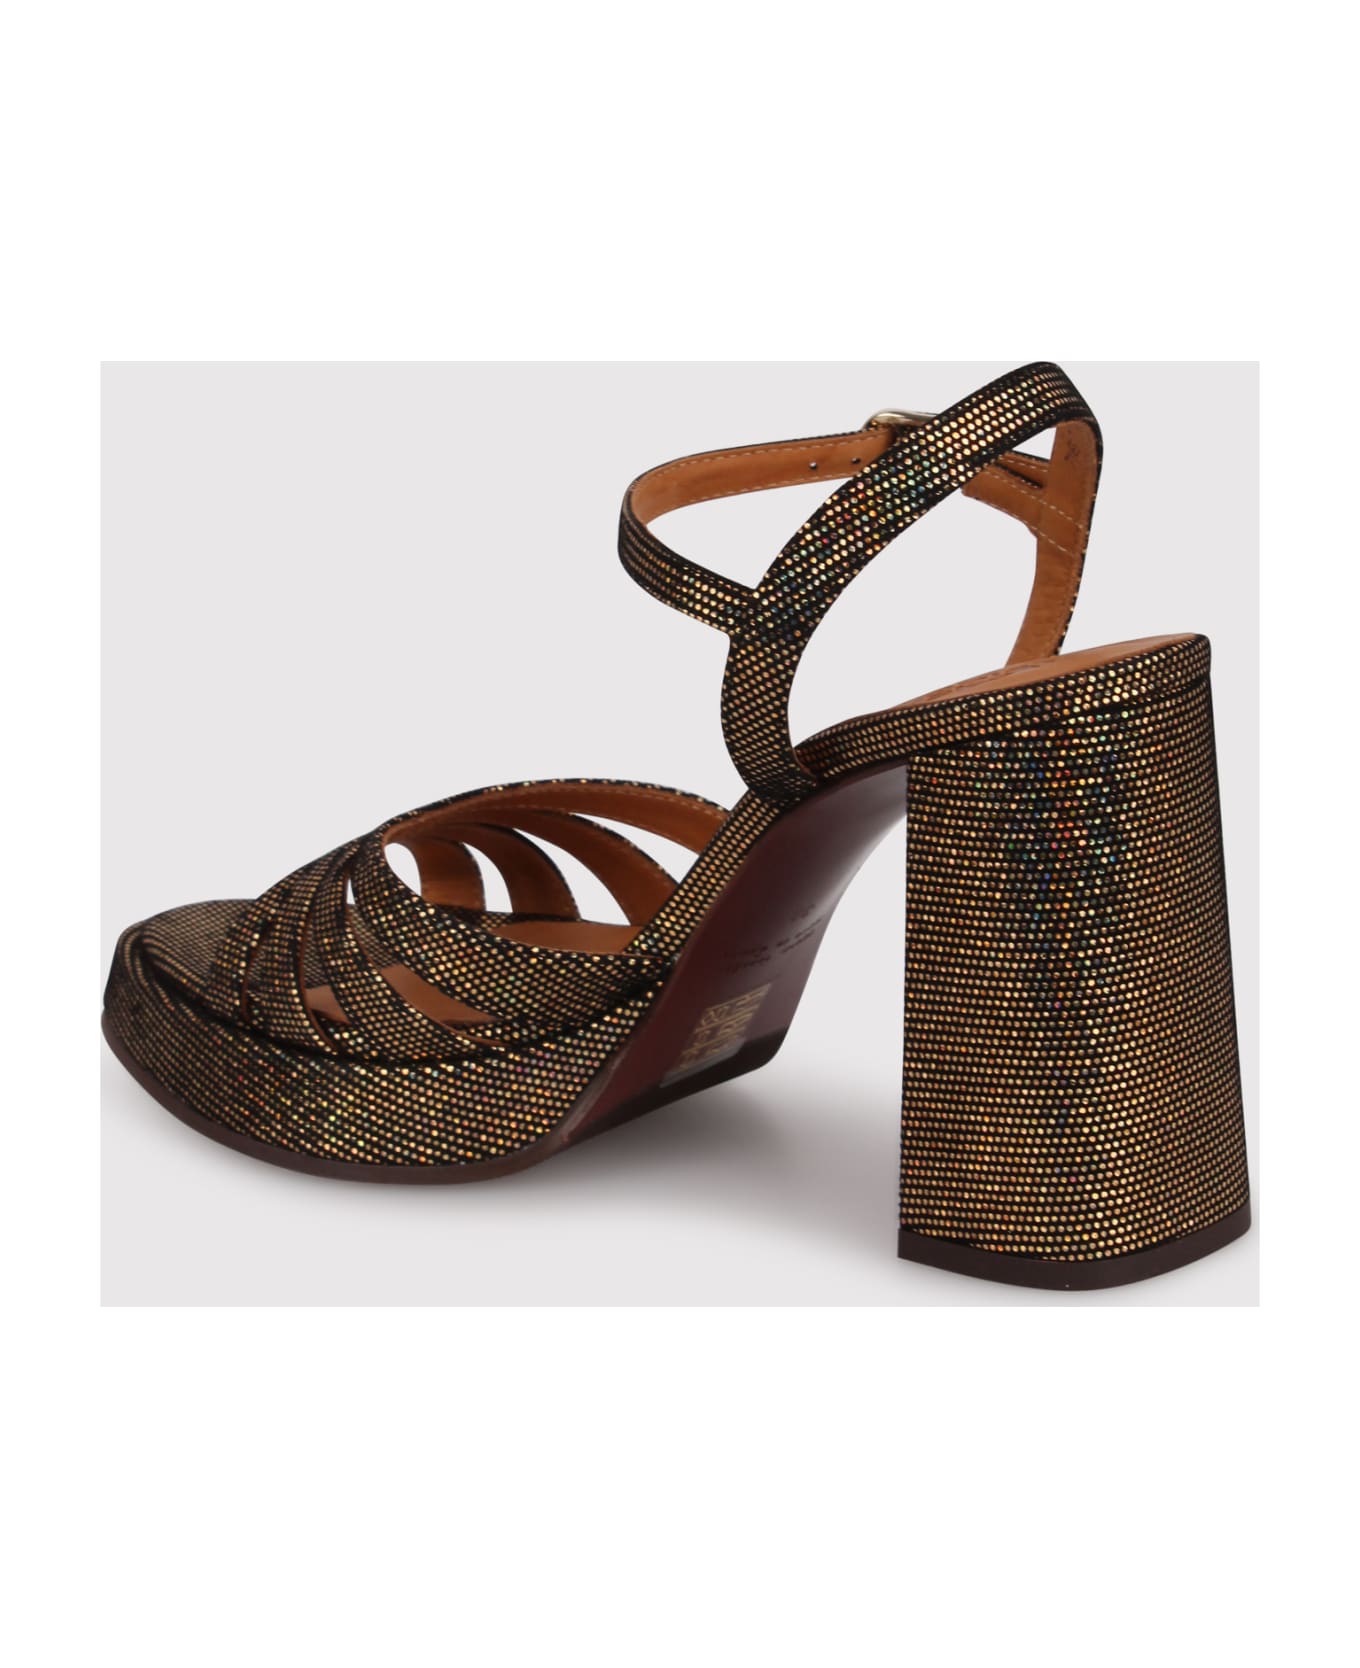 Chie Mihara Aniel Leather Sandals